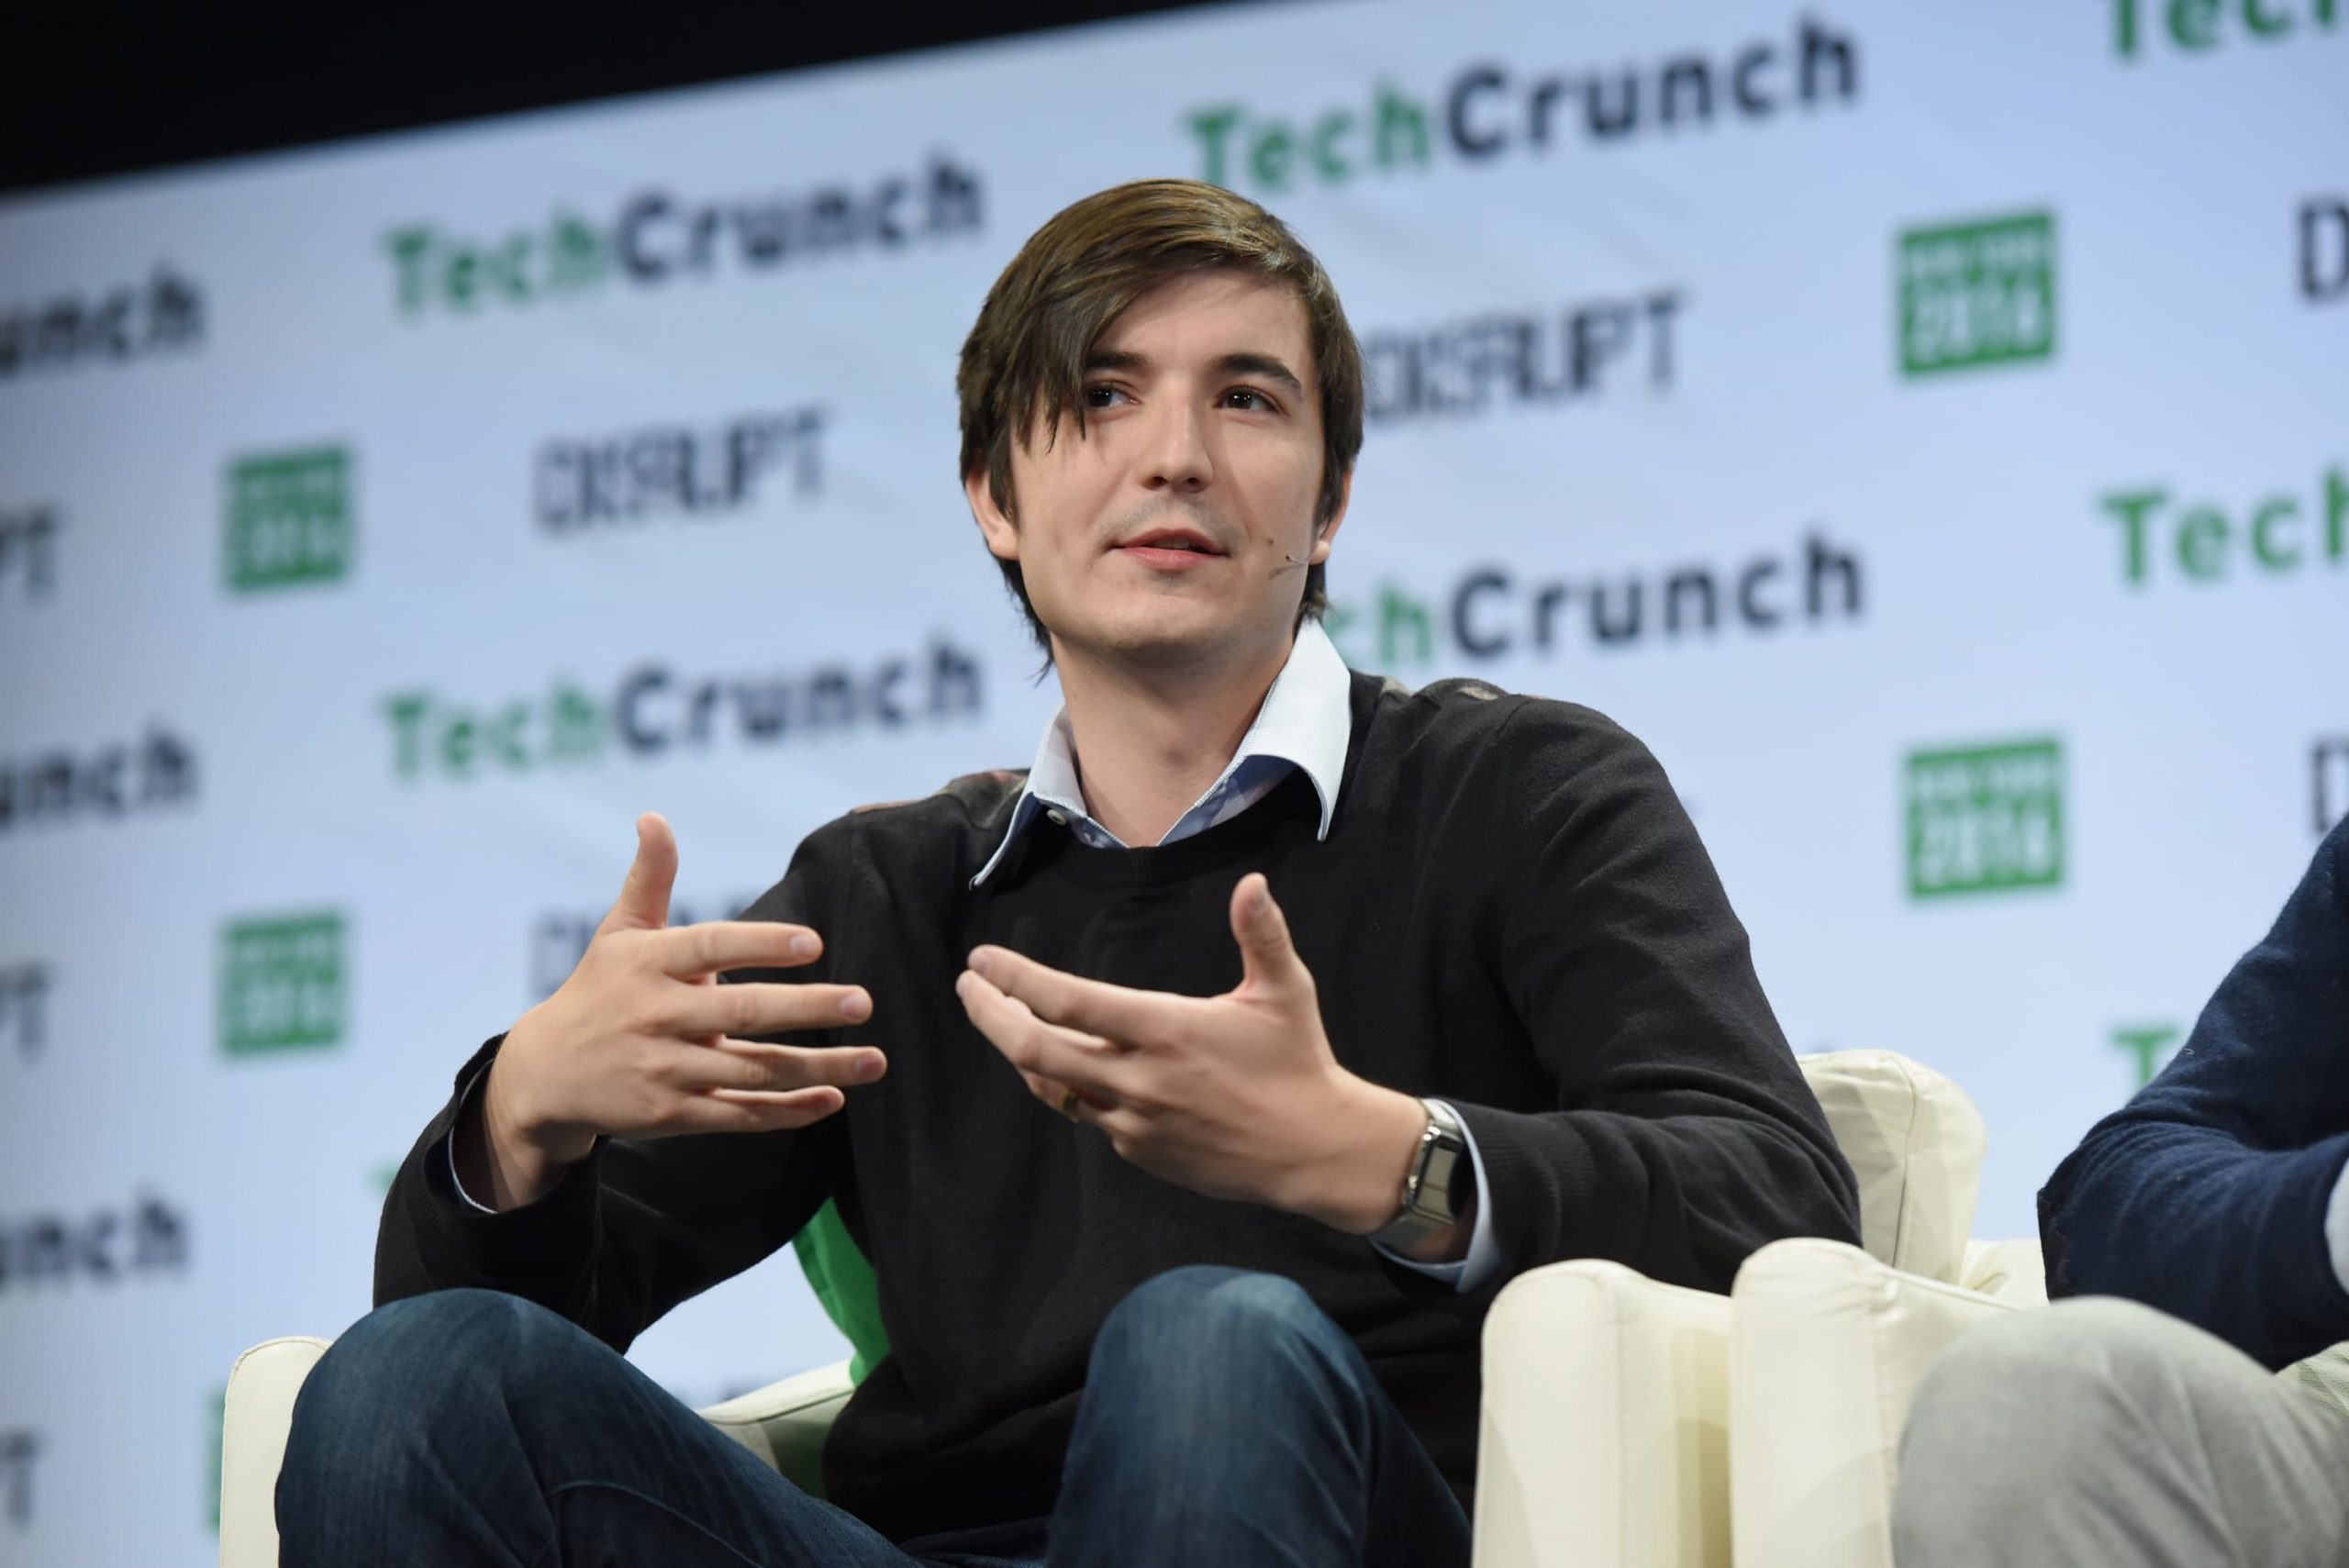 Robinhood CEO explains to Elon Musk why his platform restricted trading last week